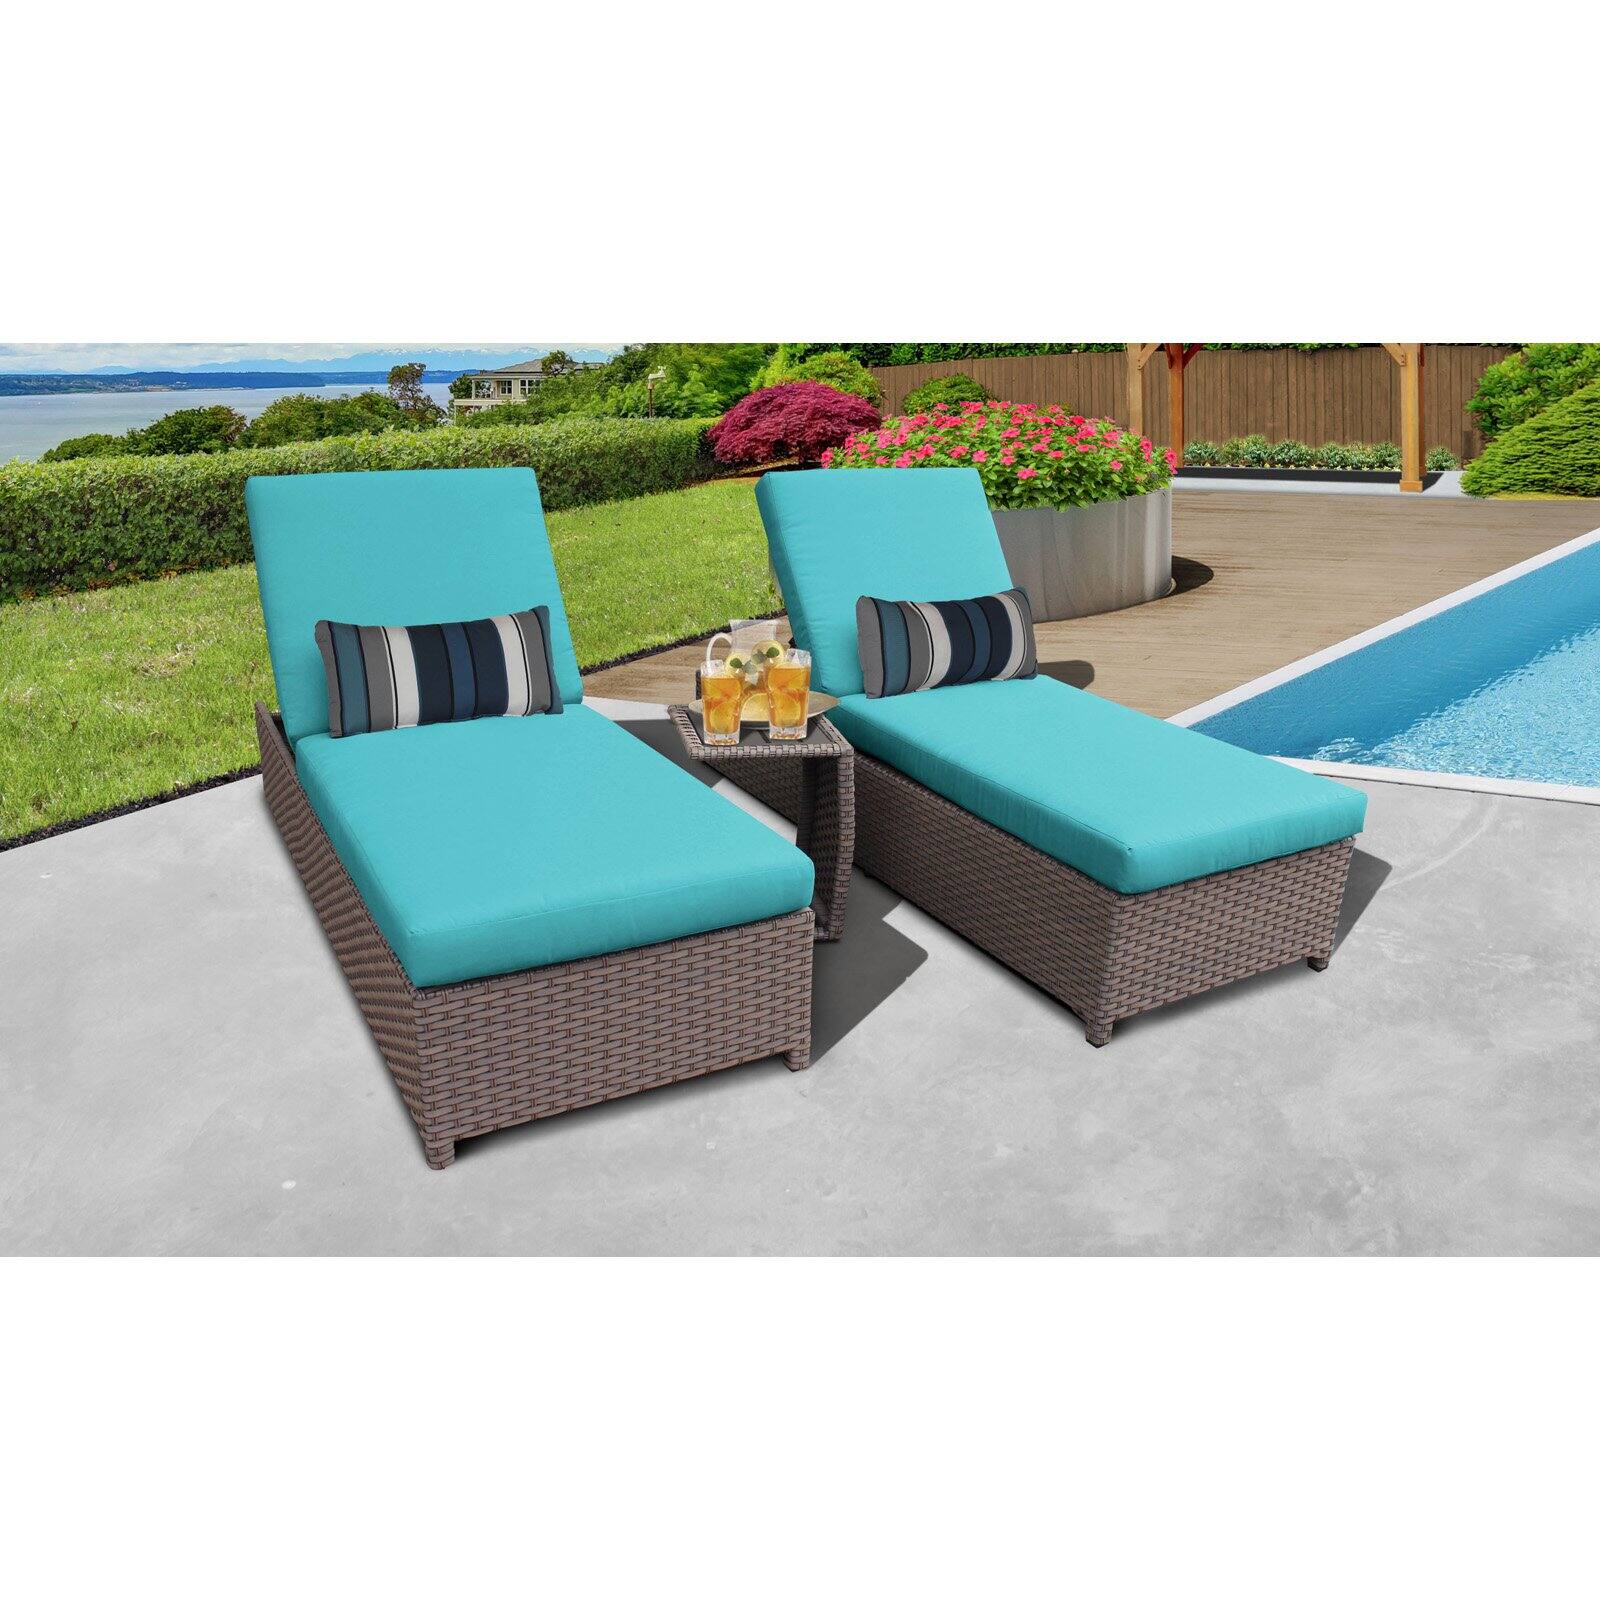 TK Classics Florence 3 Piece Wheeled Wicker Outdoor Chaise Lounge Set - image 5 of 11